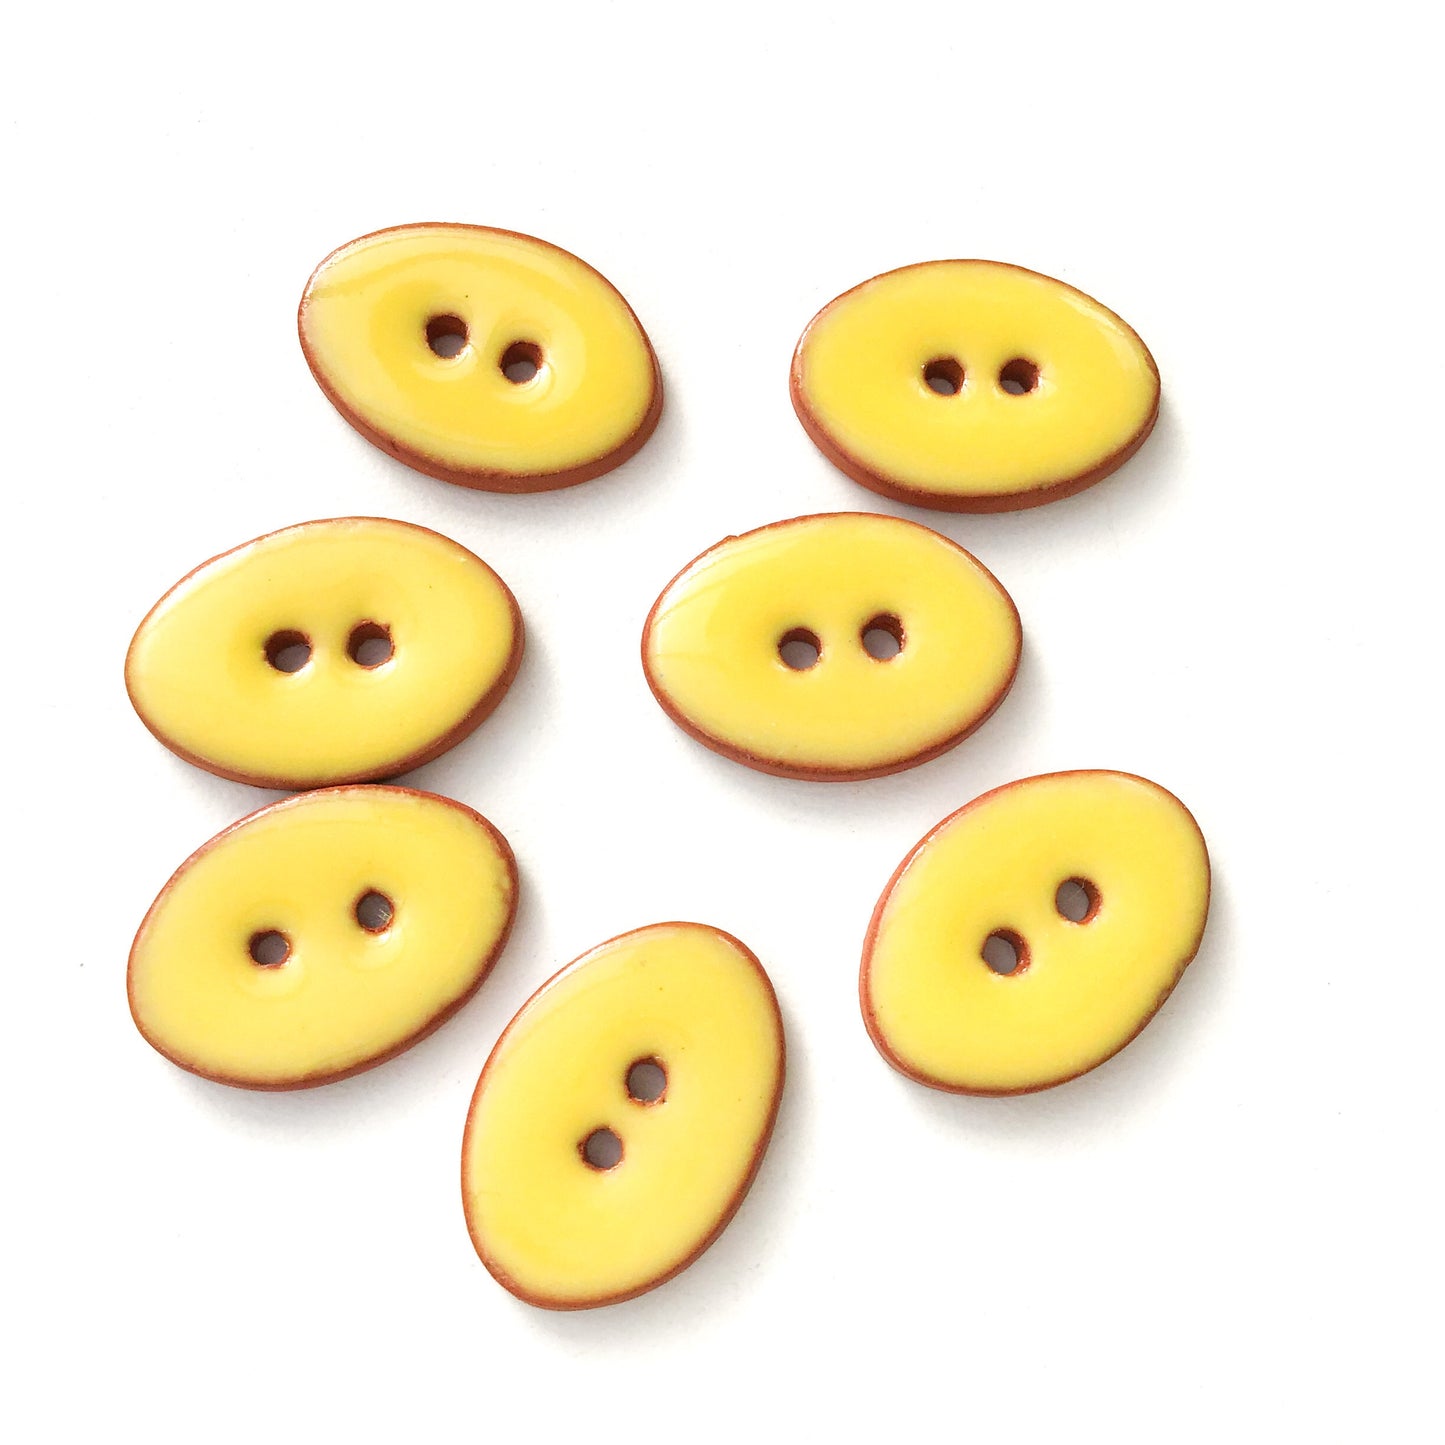 Bright Yellow Oval Clay Buttons - 5/8" x 7/8" - 7 Pack (ws-19)